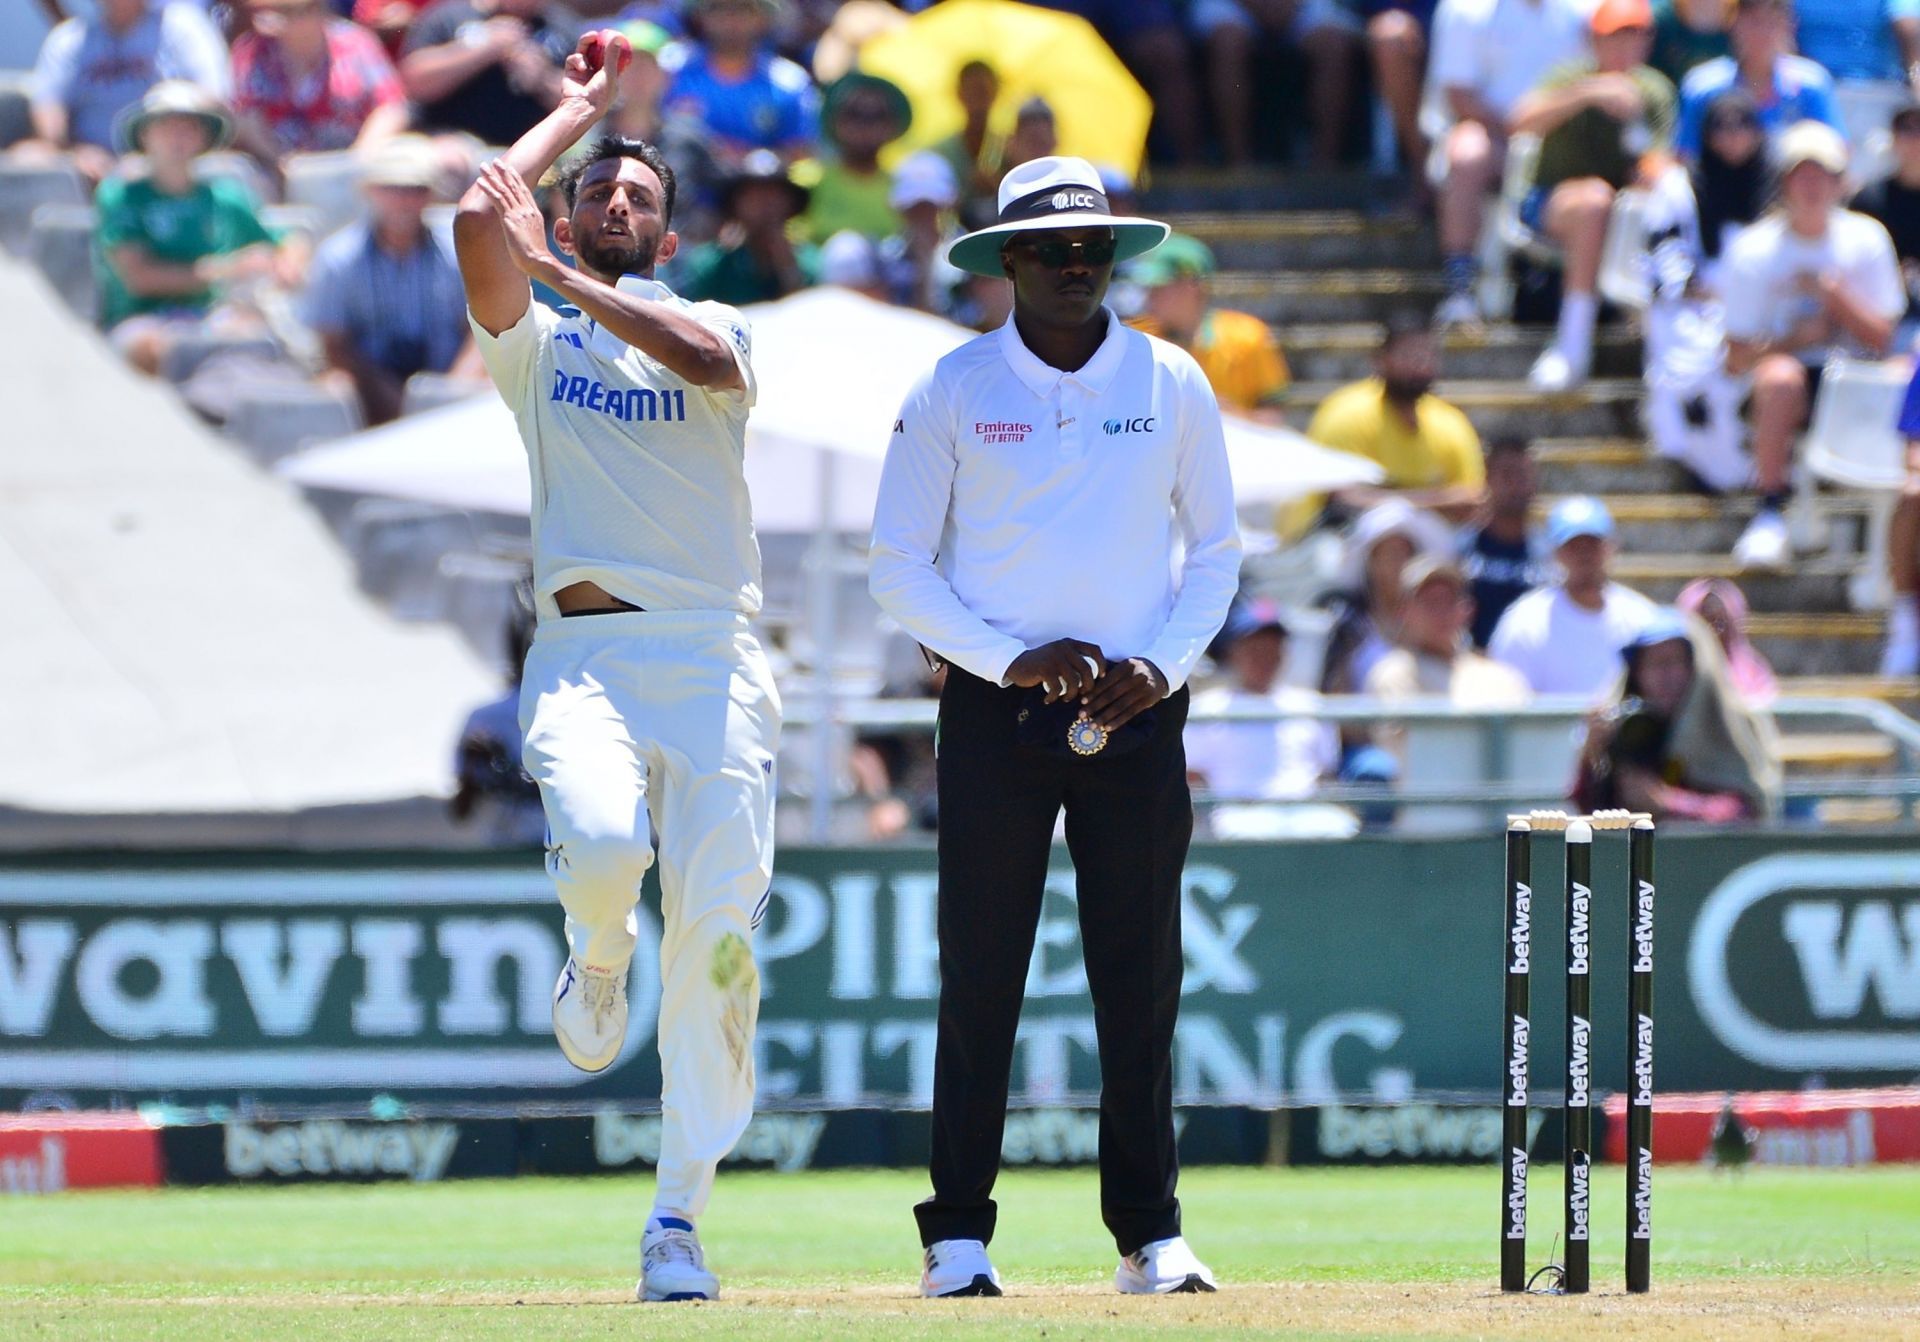 Prasidh Krishna picked up just one wicket in the South Africa v India - 2nd Test